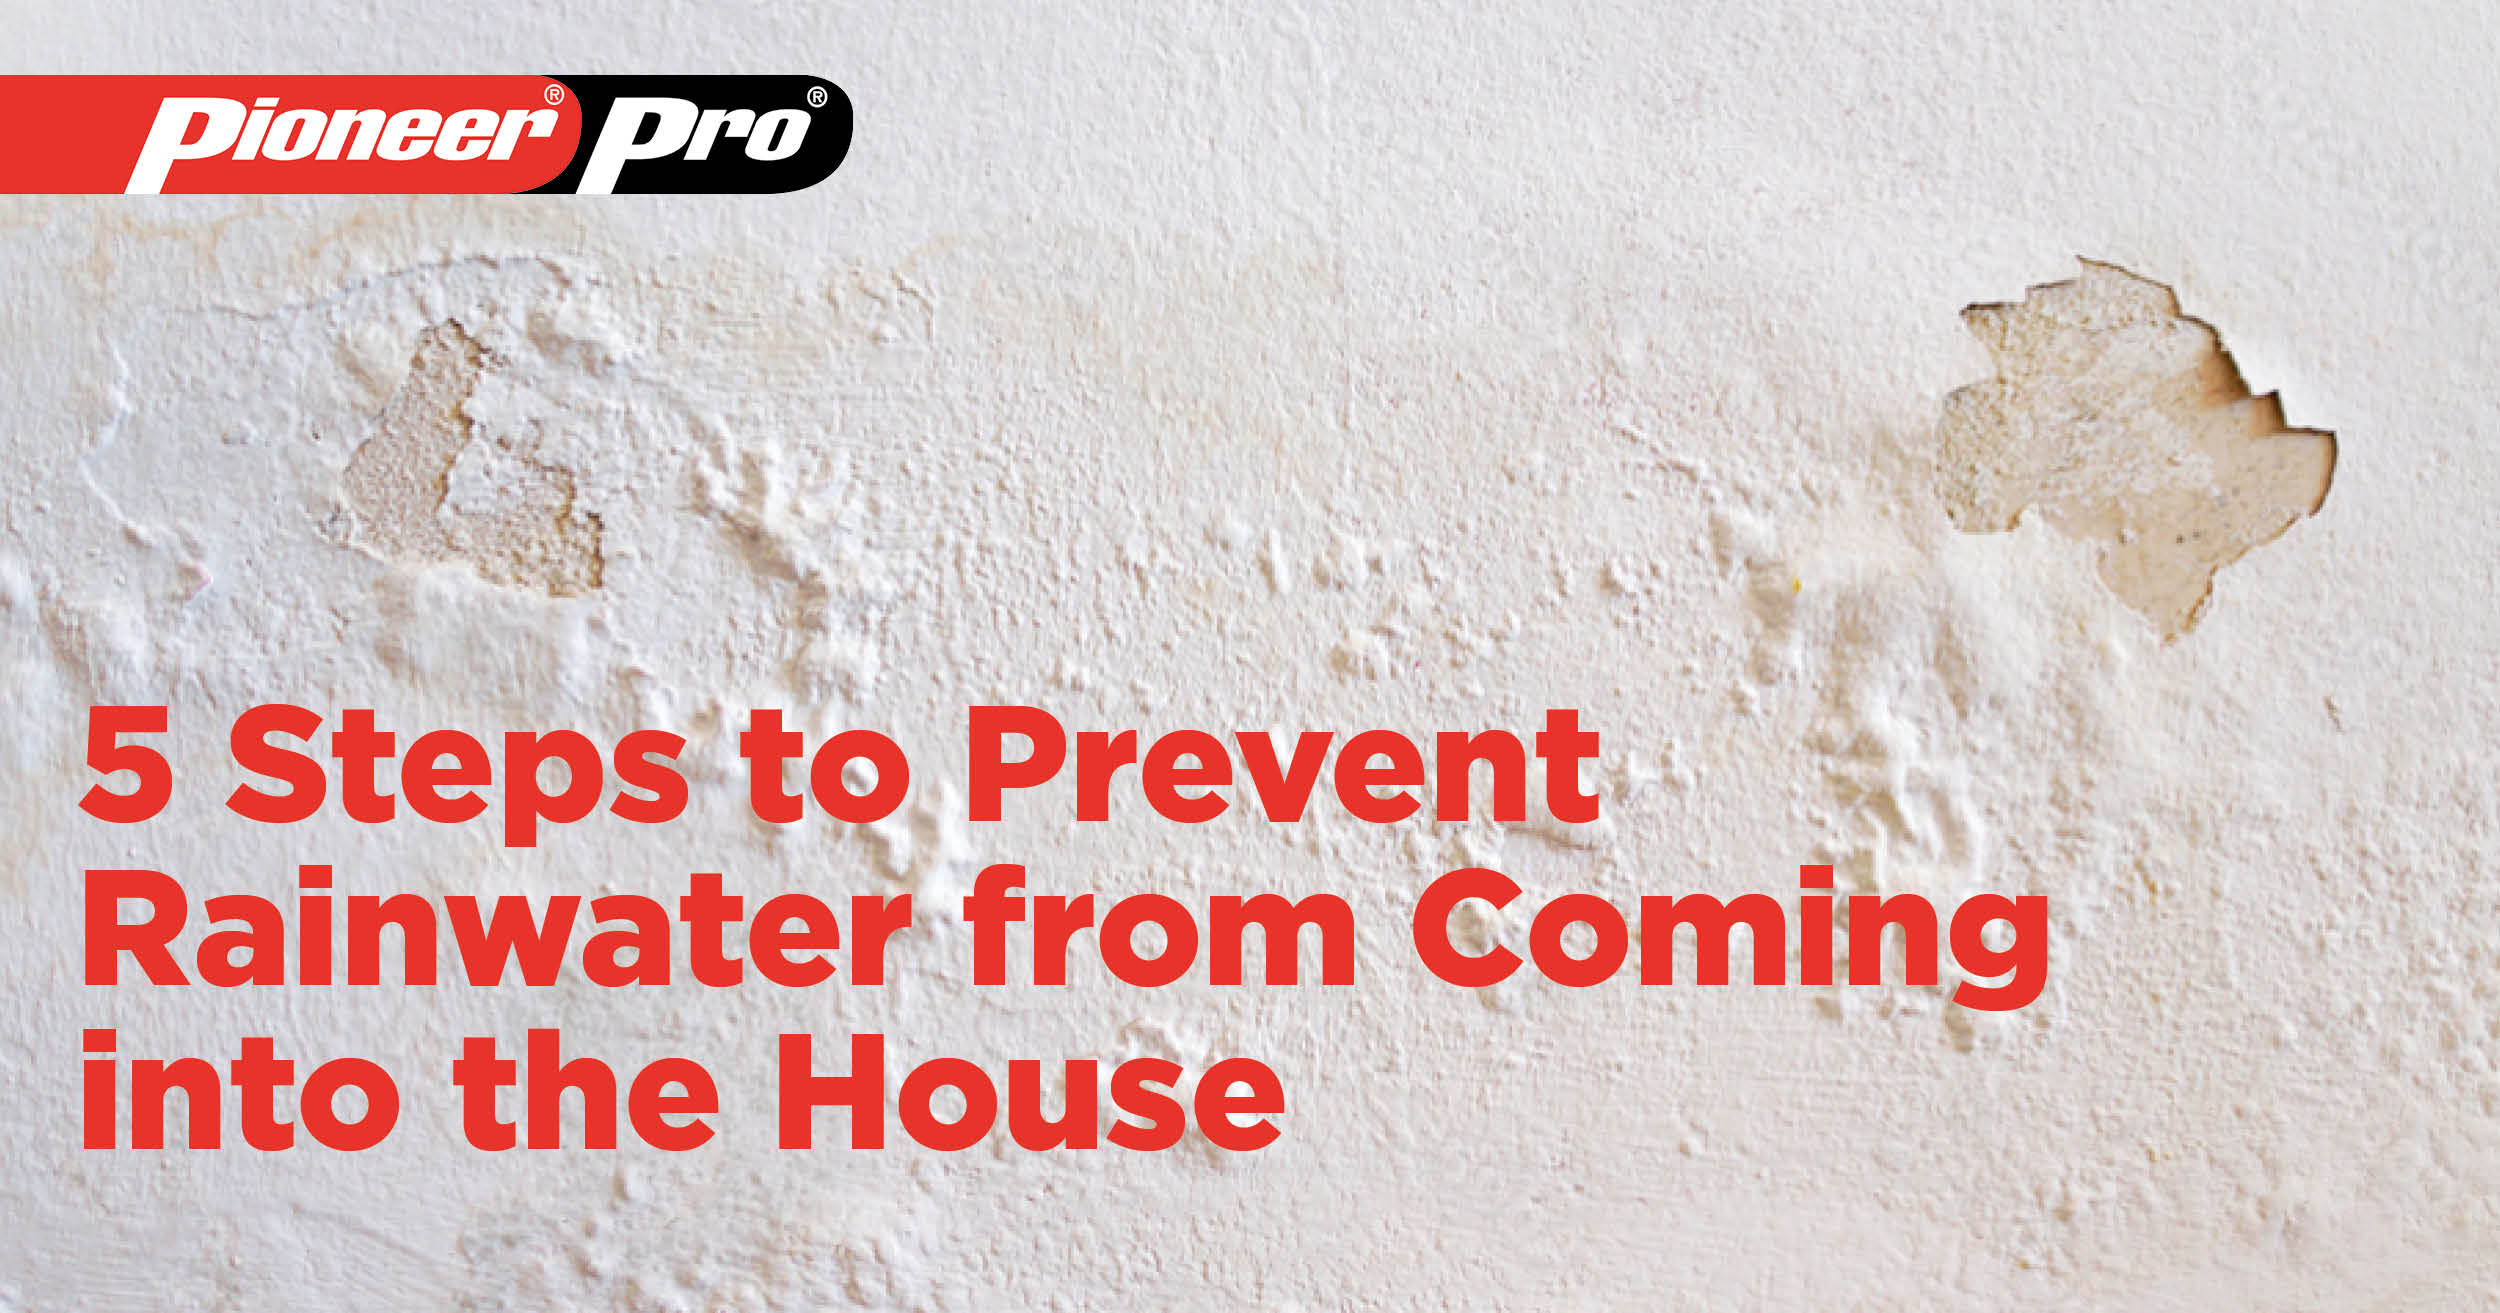 pioneer pro prevent rainwater into the house